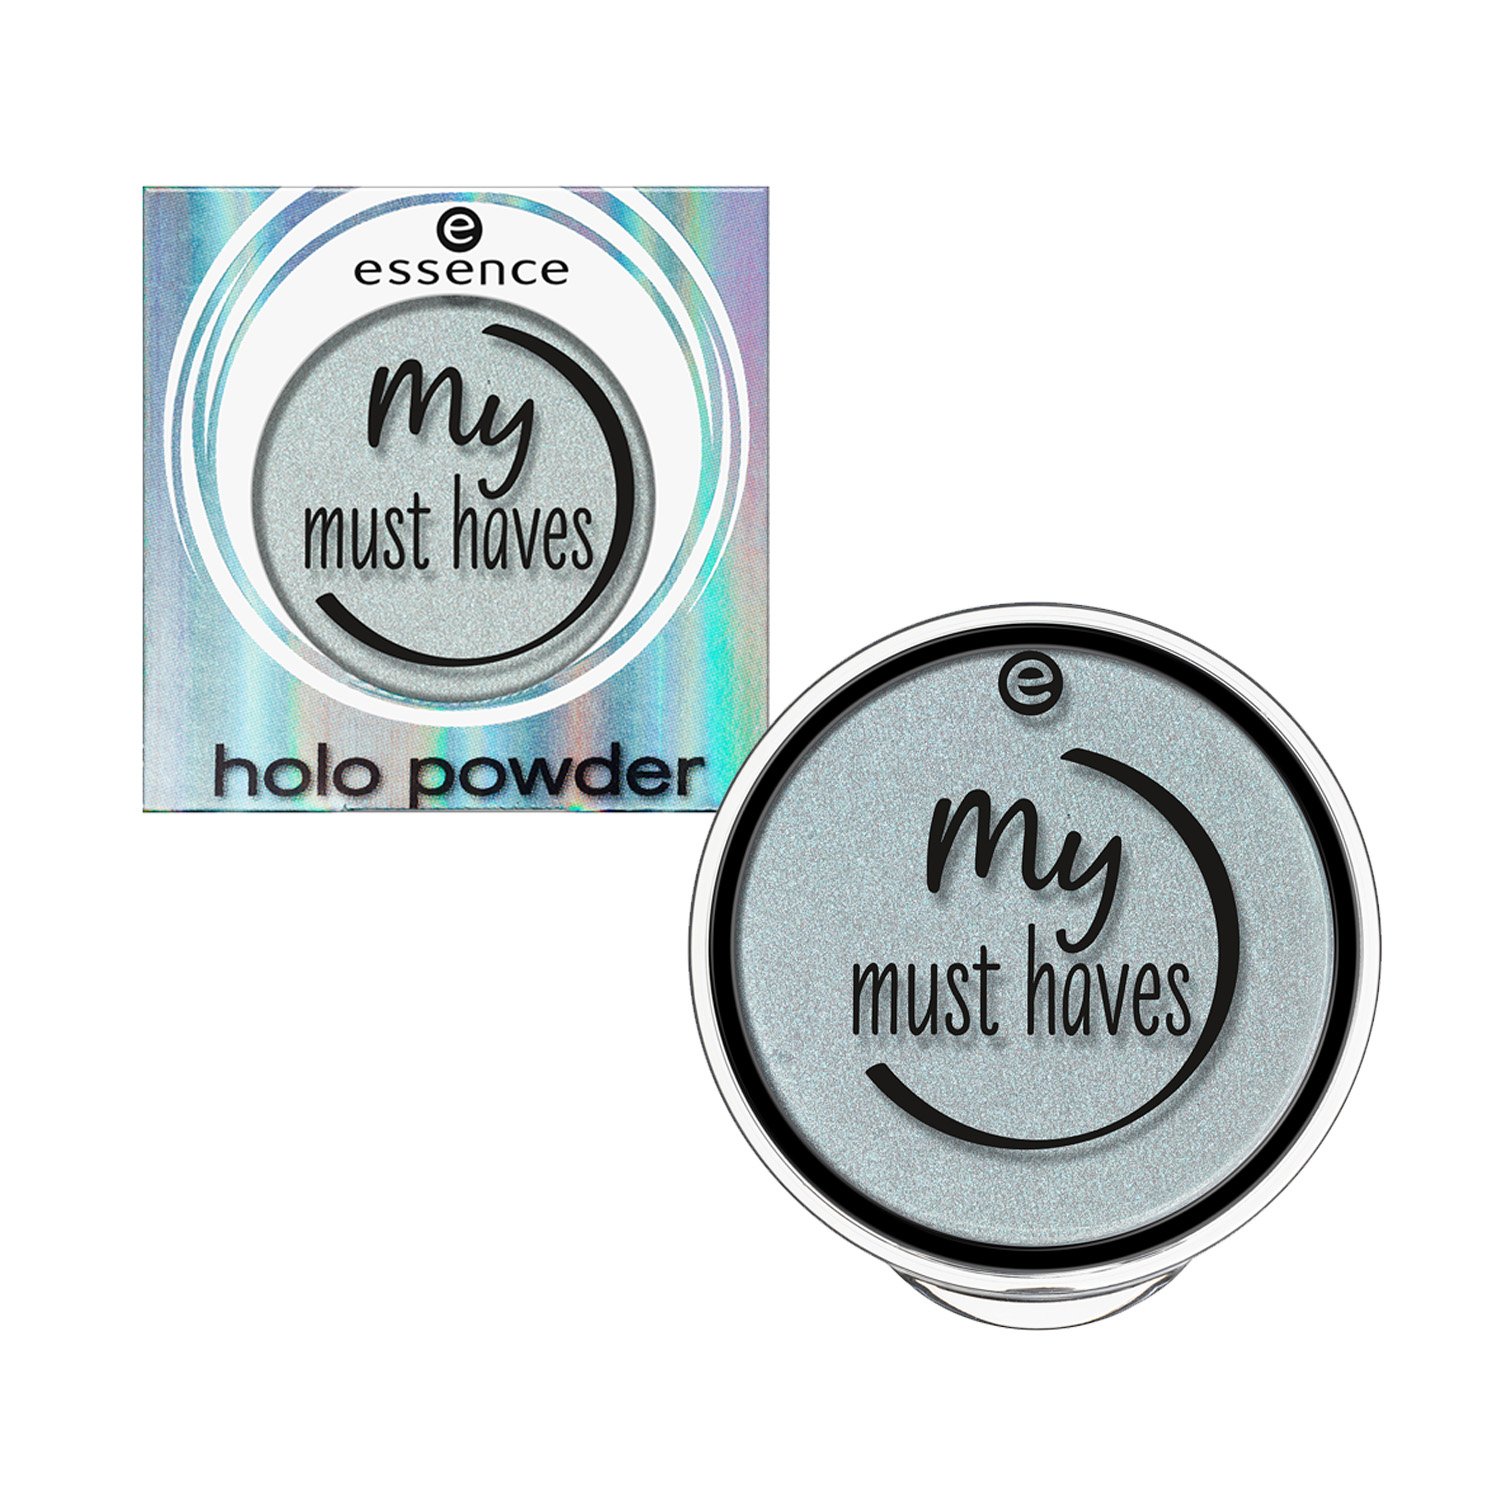 essence my must haves holo powder 04